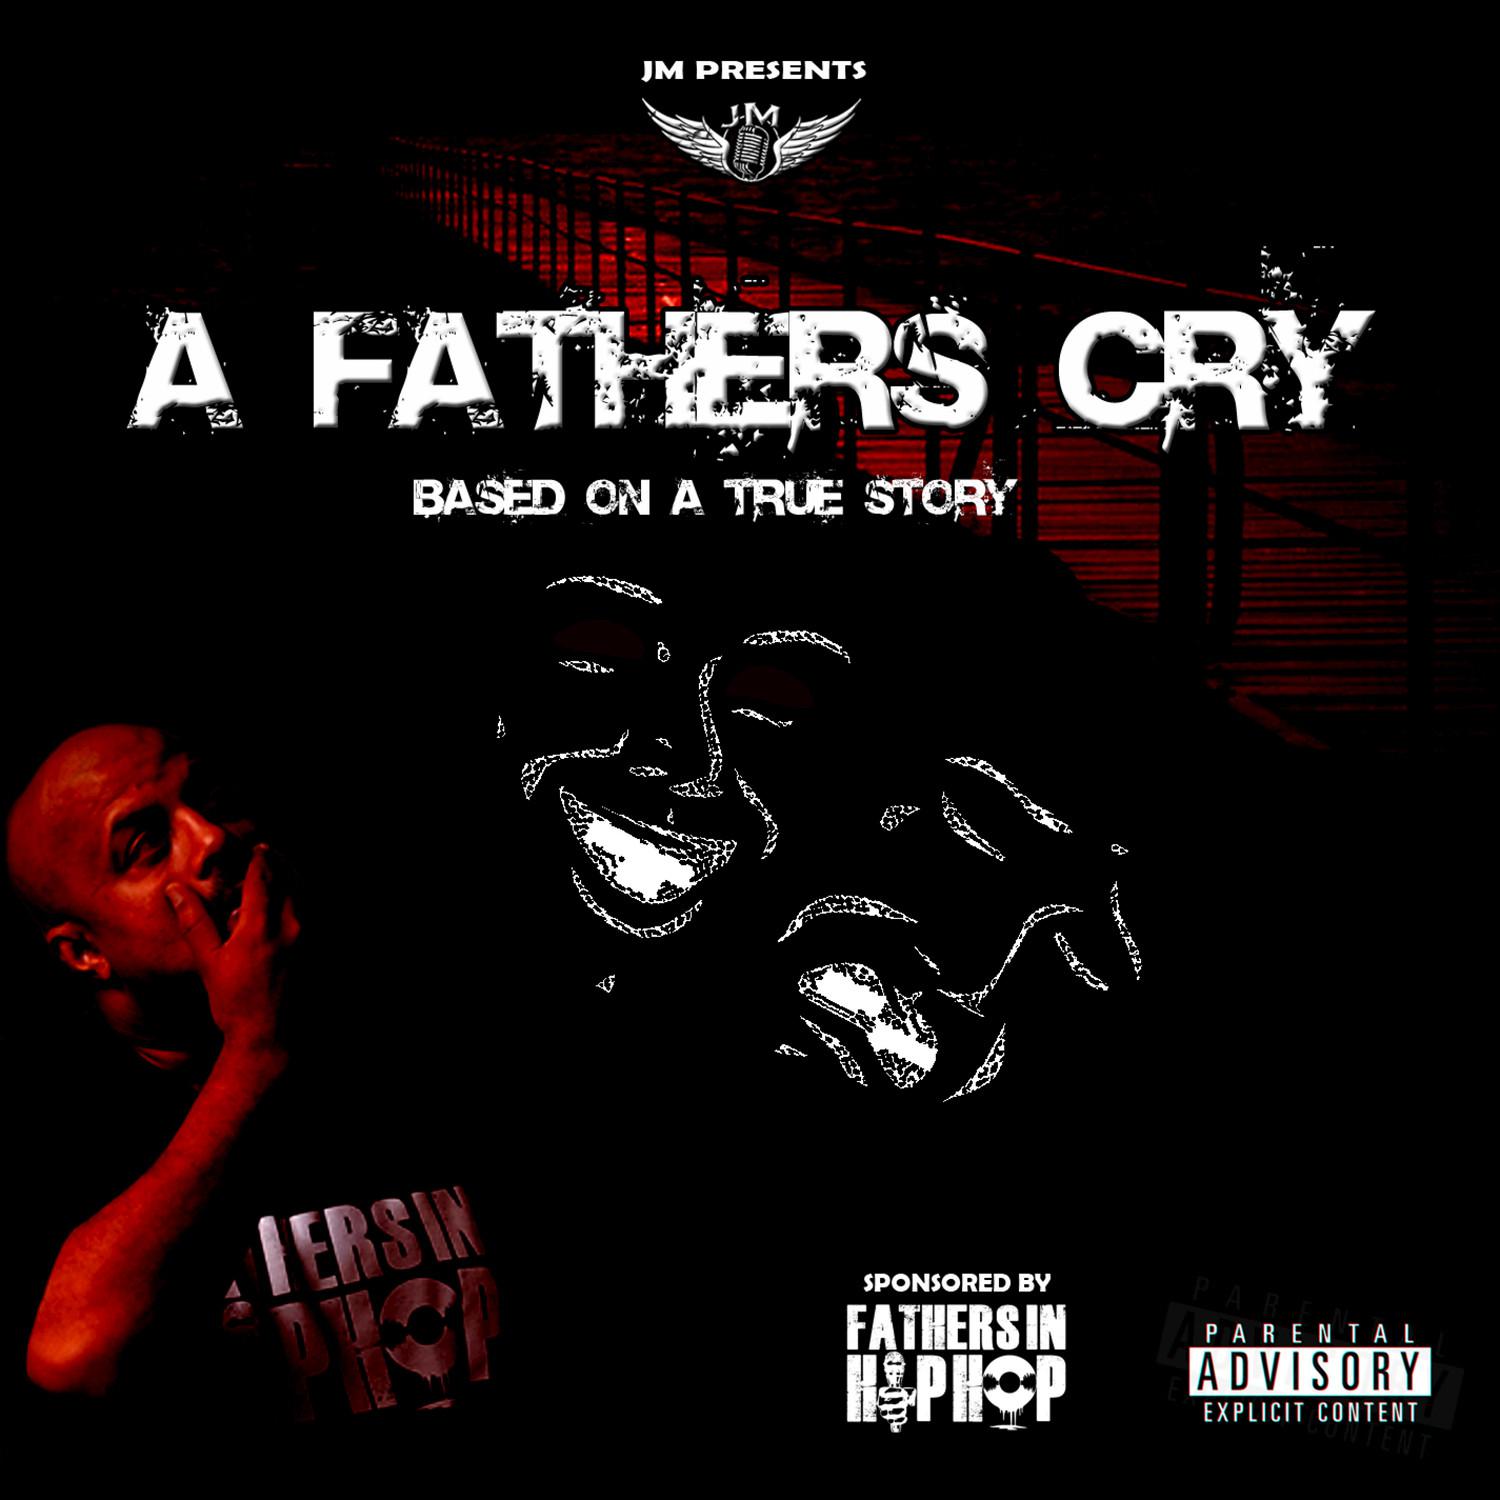 A Father's Cry